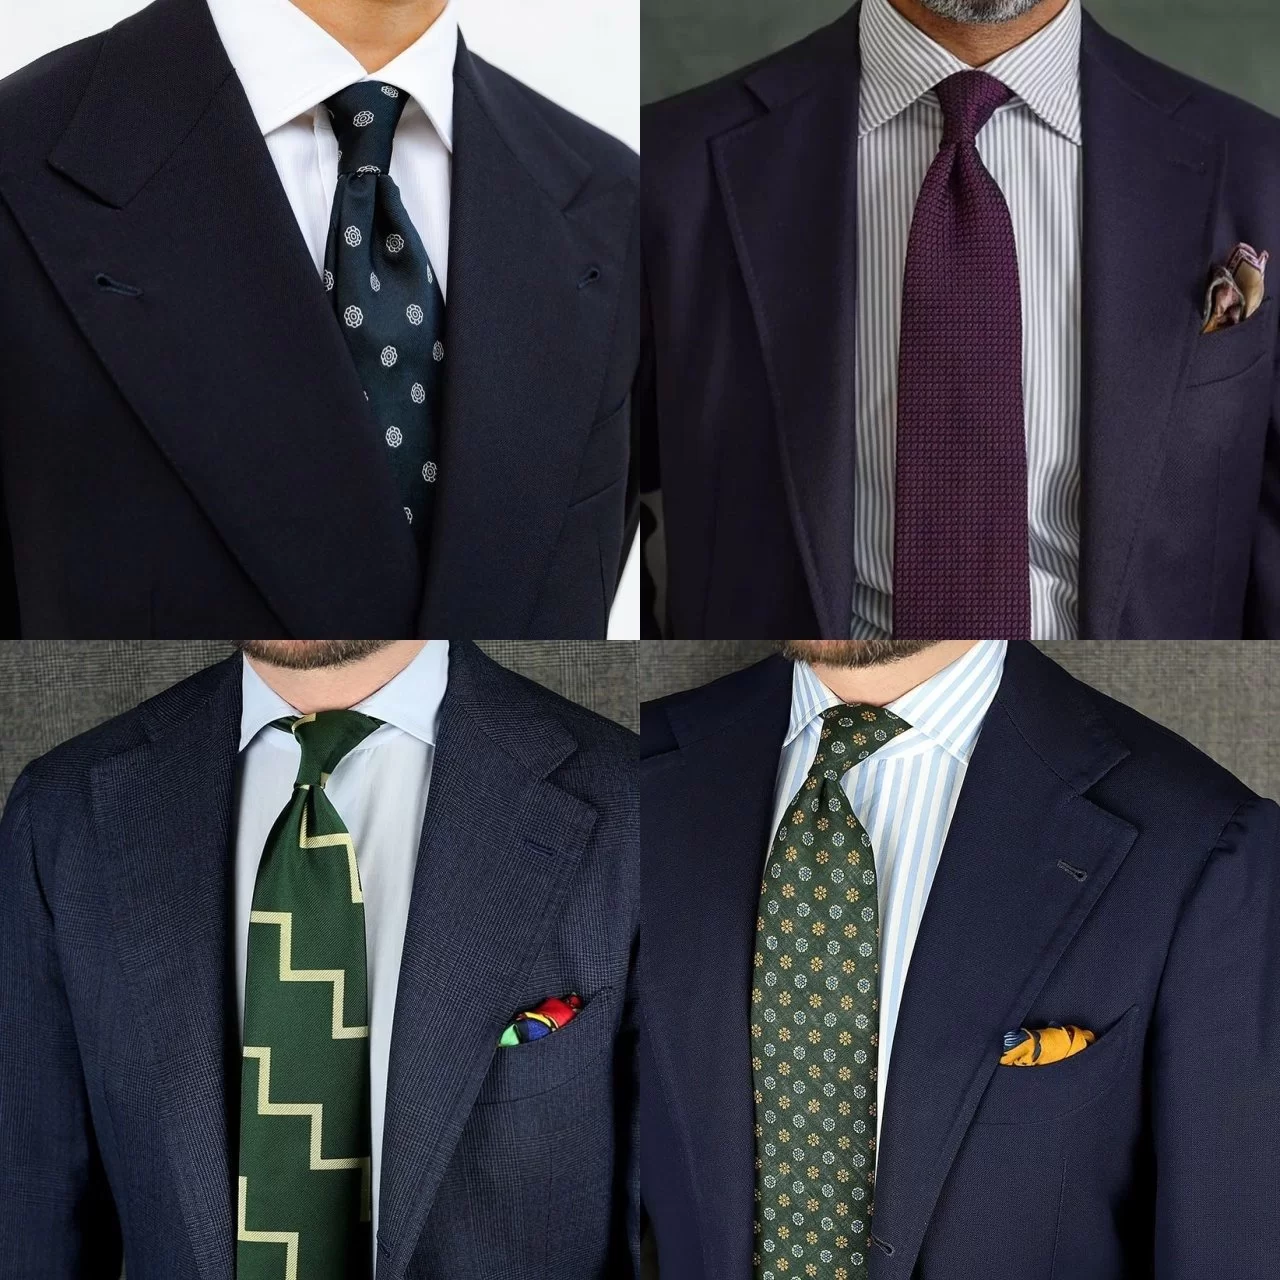 How to match a tie to shirt and suit or blazer - analogous colors